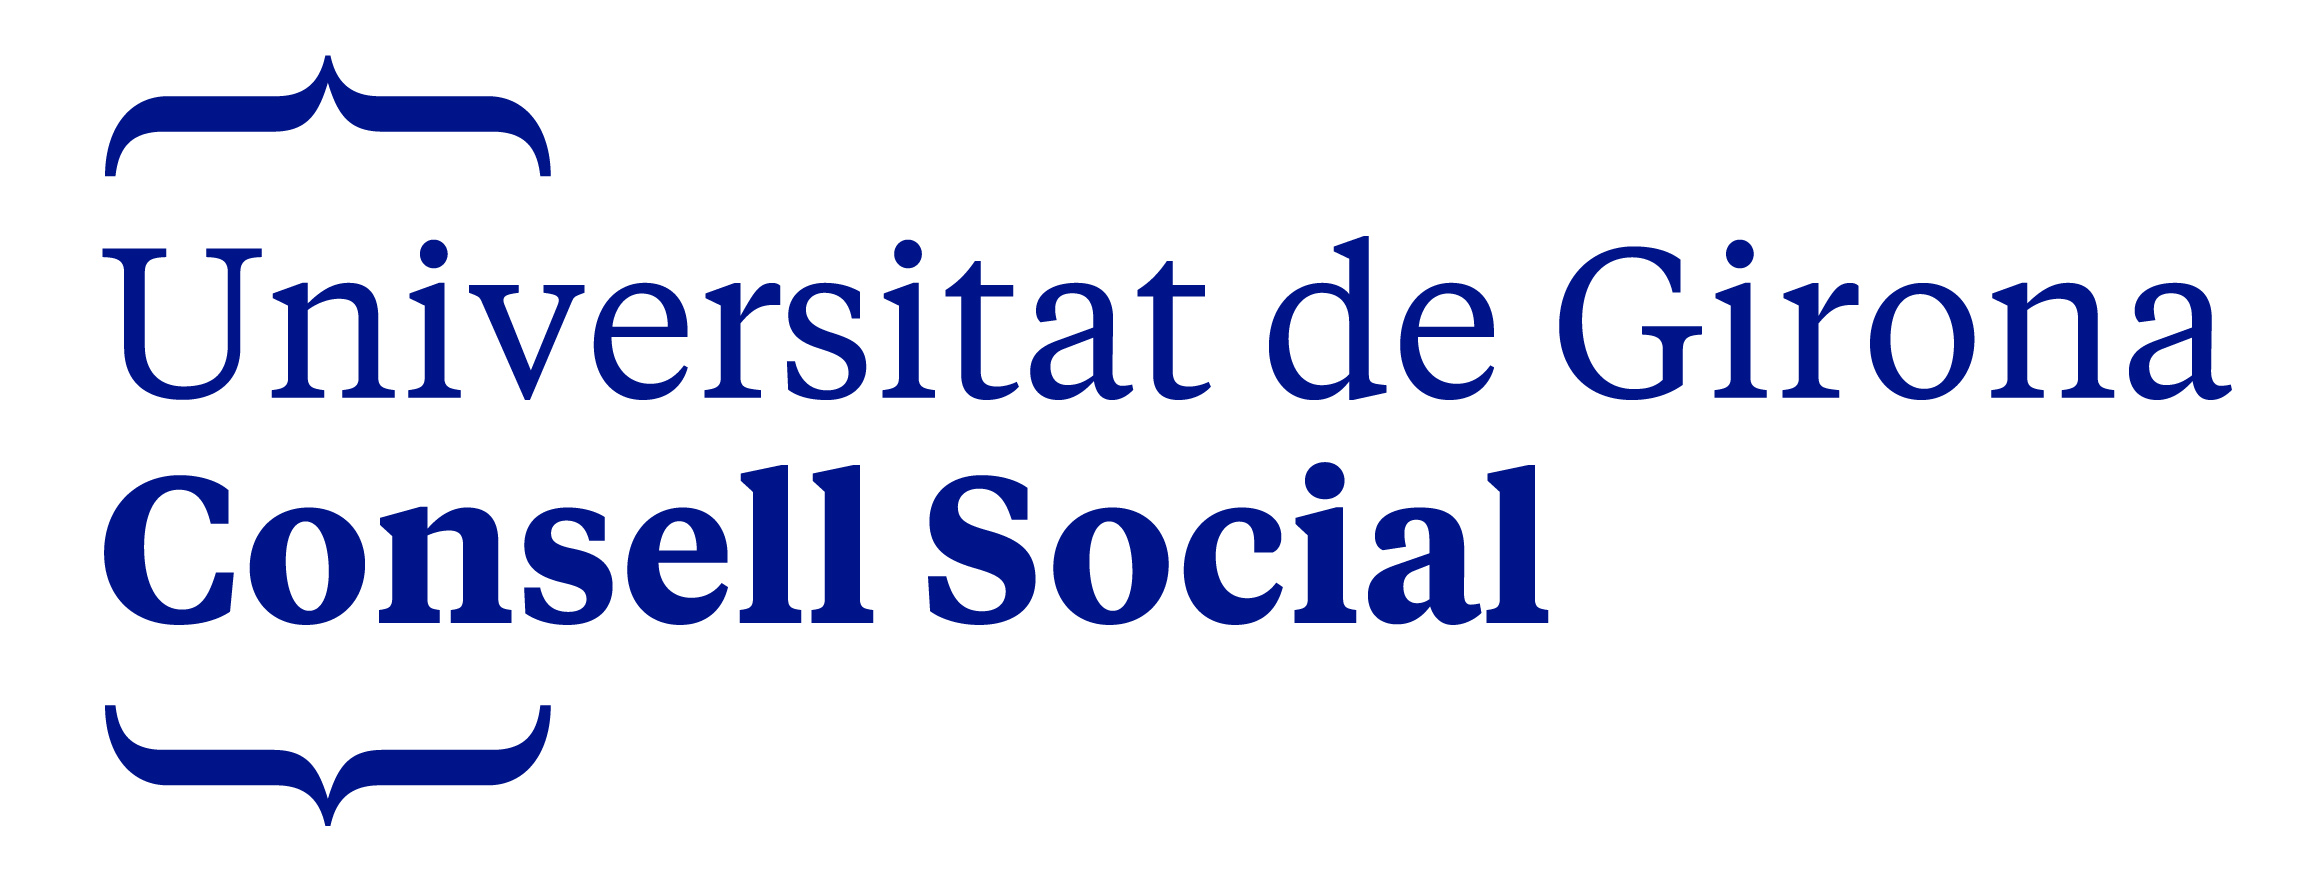 Consell Social UdG